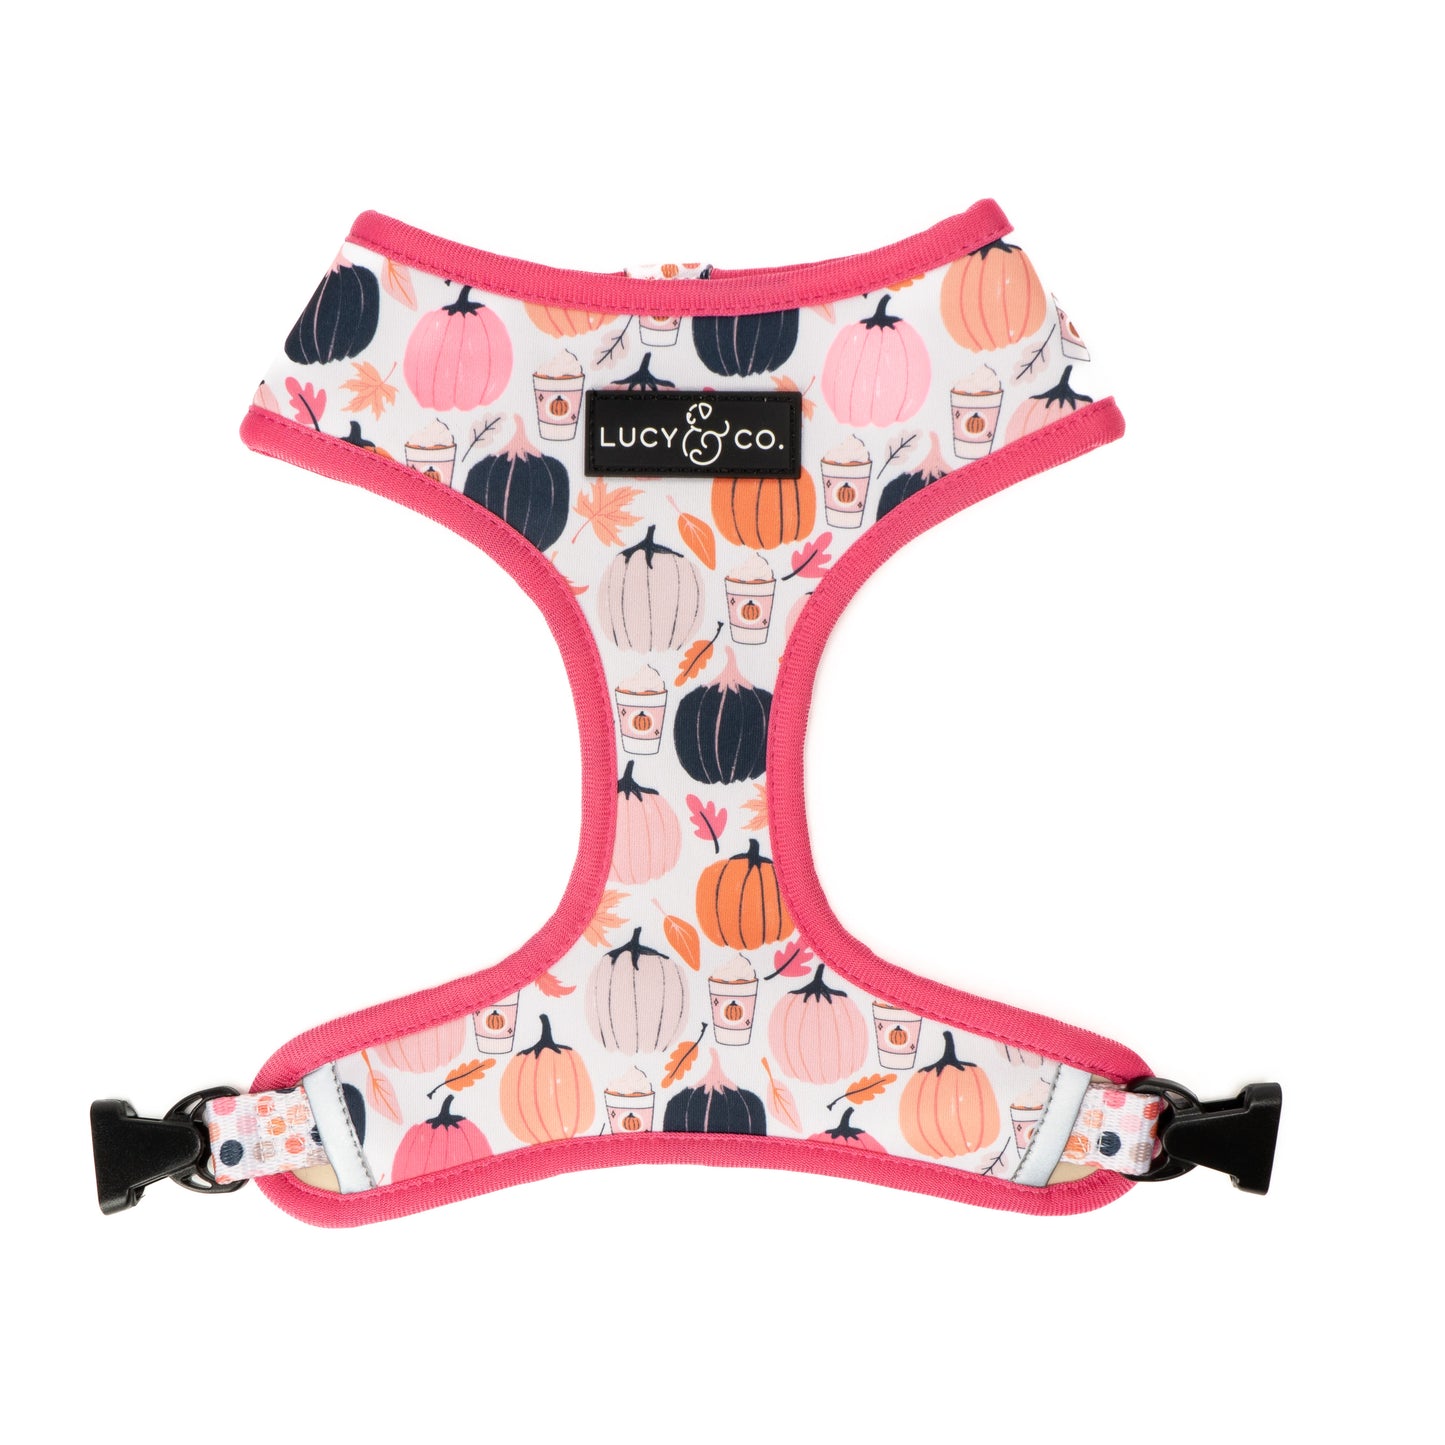 The Falling for You Reversible Harness